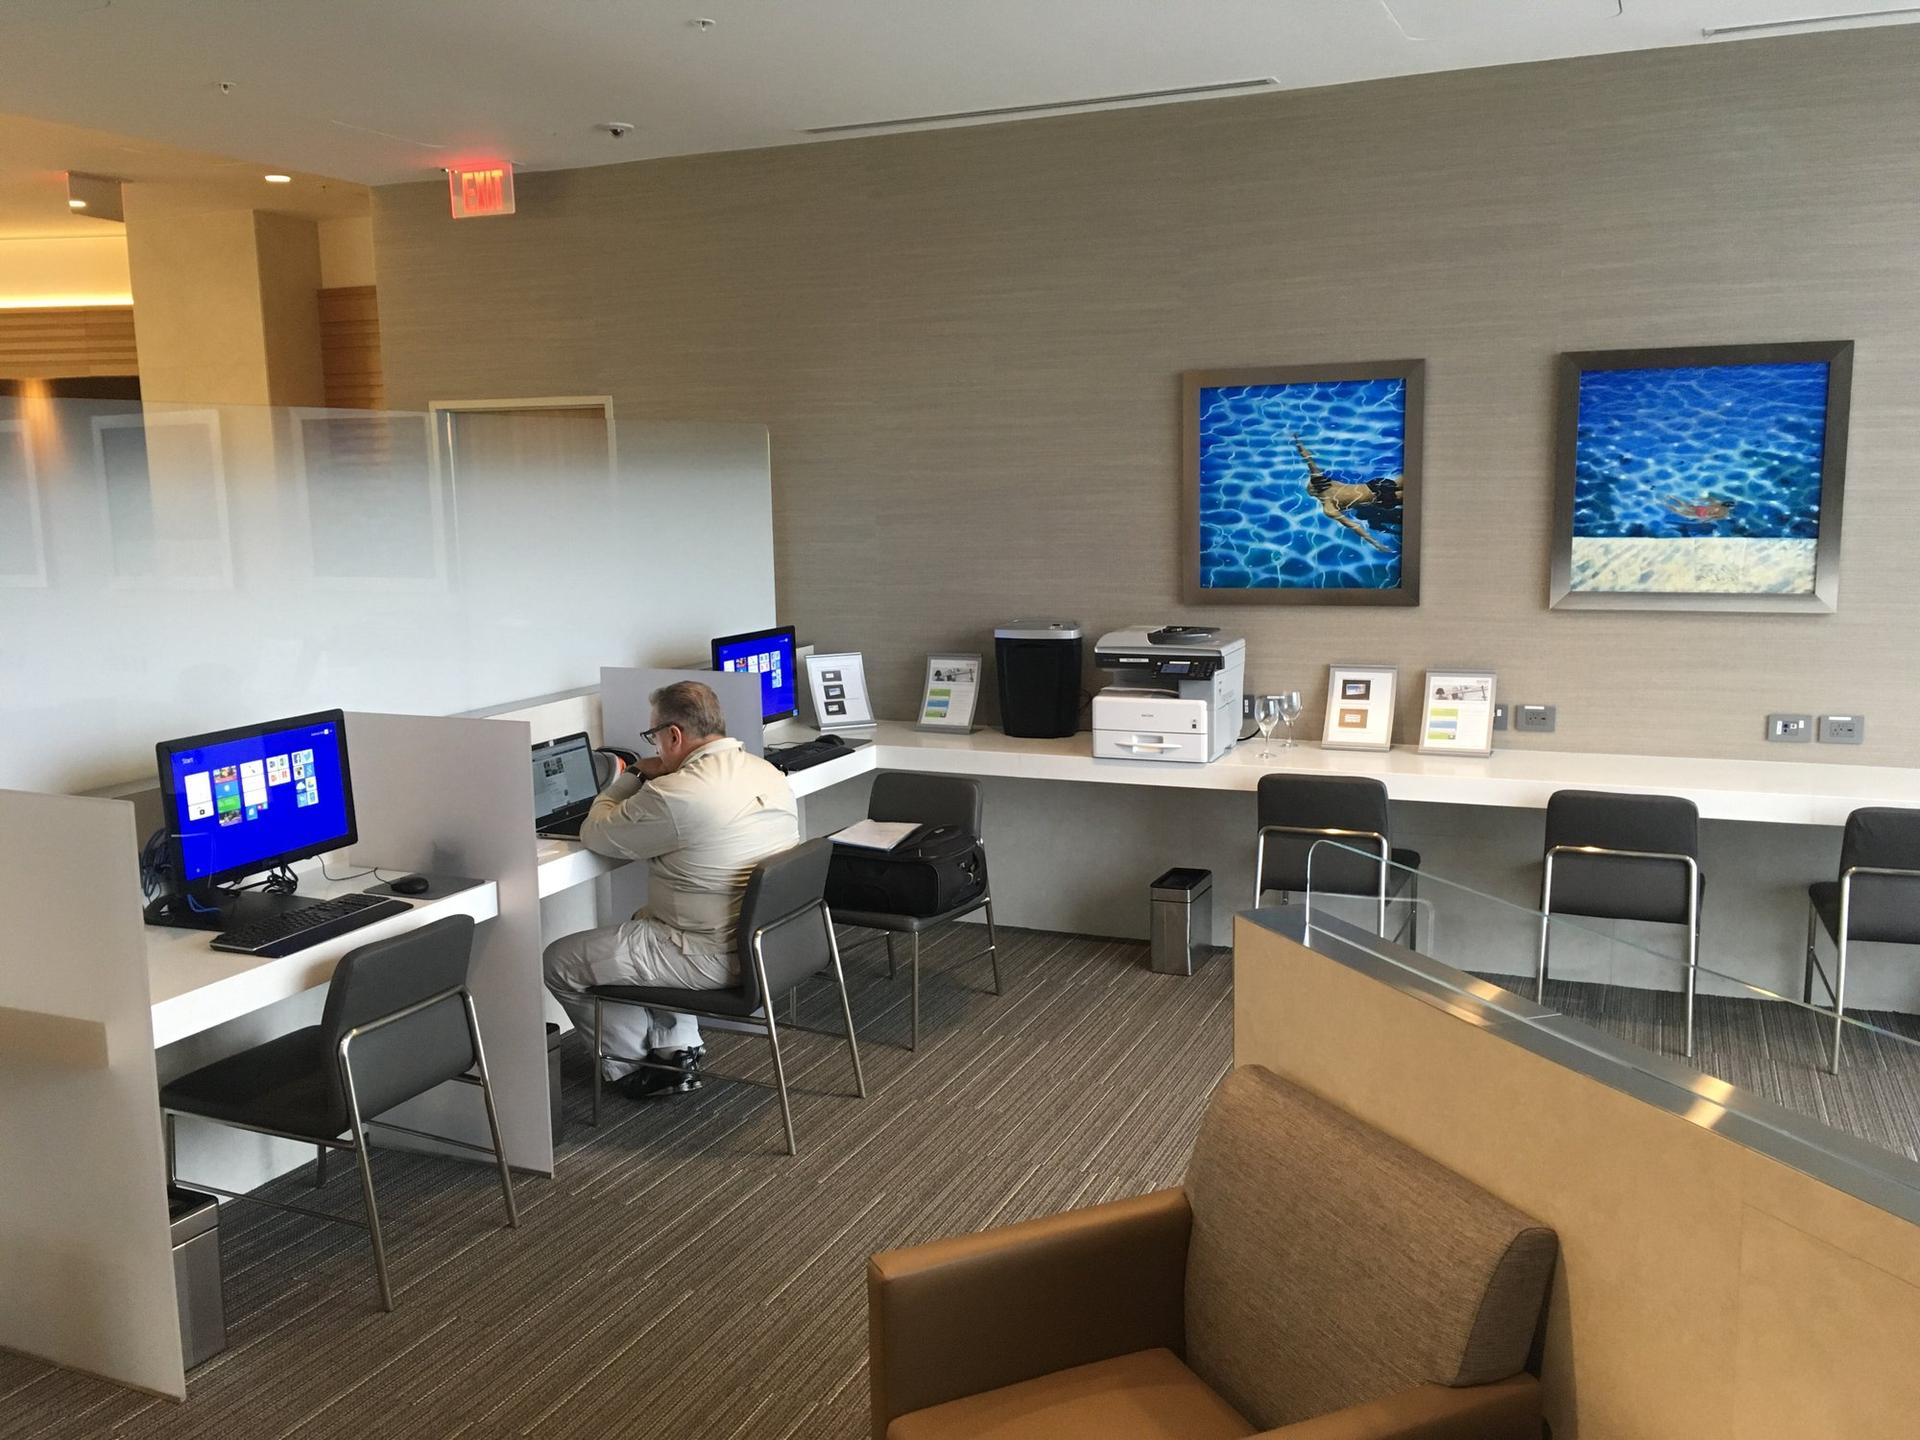 American Airlines Flagship Lounge image 11 of 65